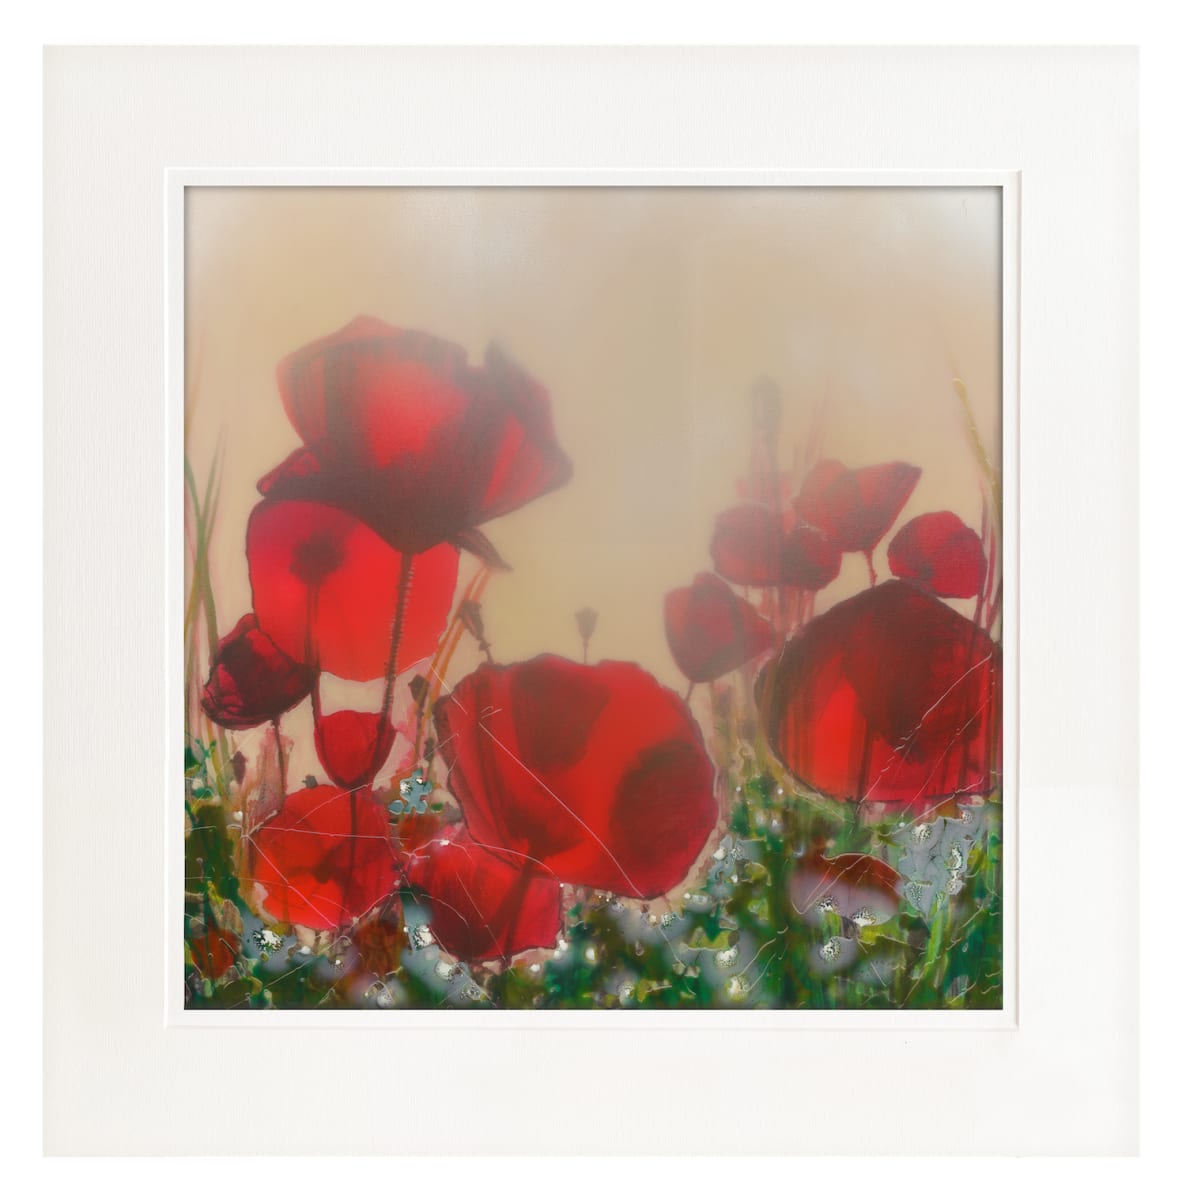 Wall art prints | Limited Edition Print | Poppy Haze - Signed Limited Edition Print with mount (unframed) - 150 in edition 3/150